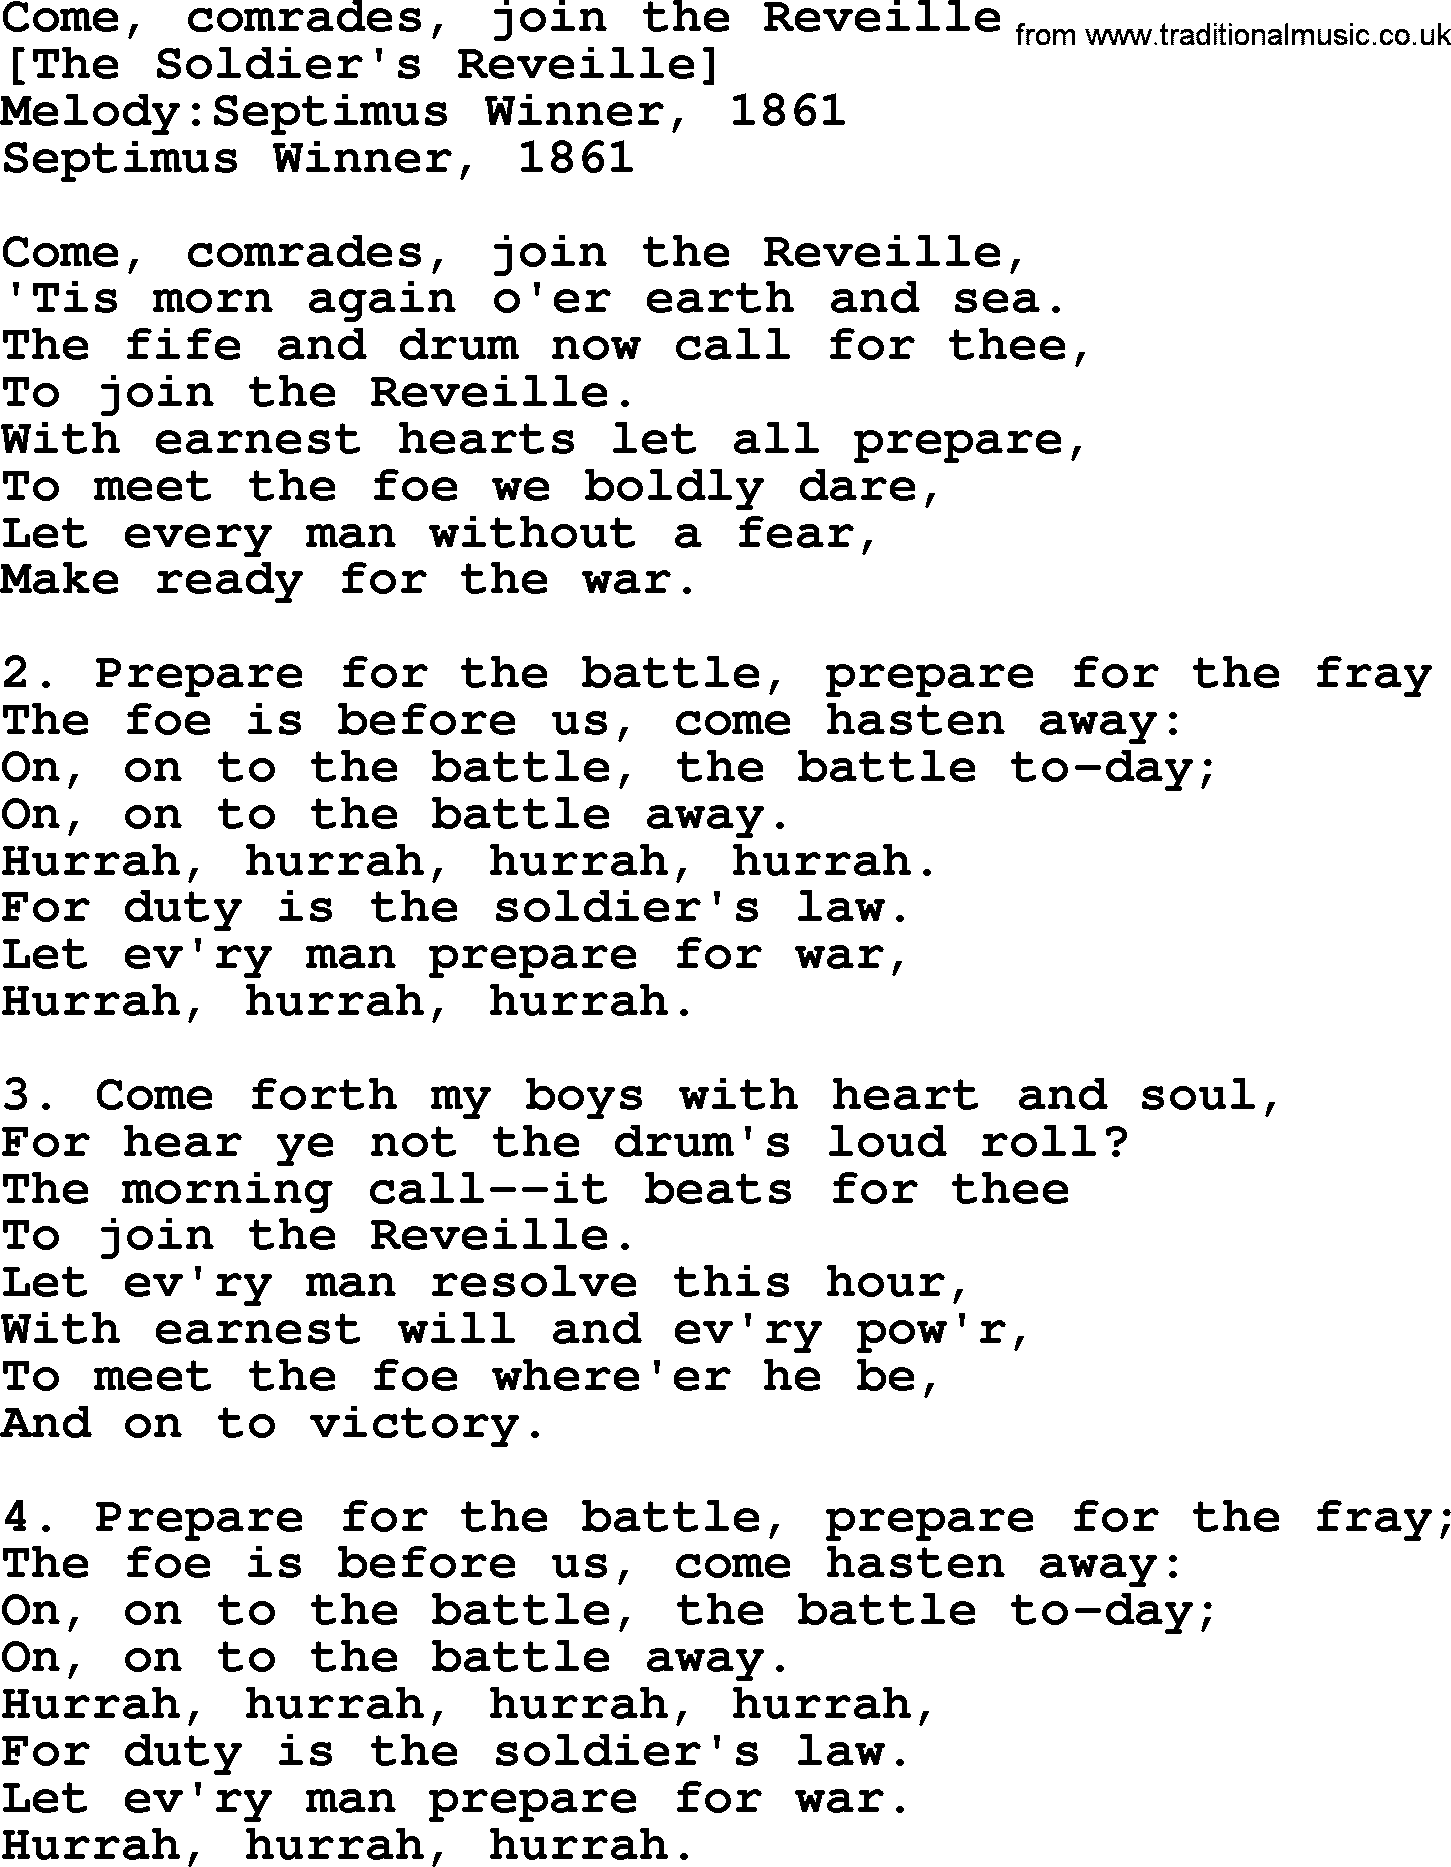 Old American Song: Come, Comrades, Join The Reveille, lyrics